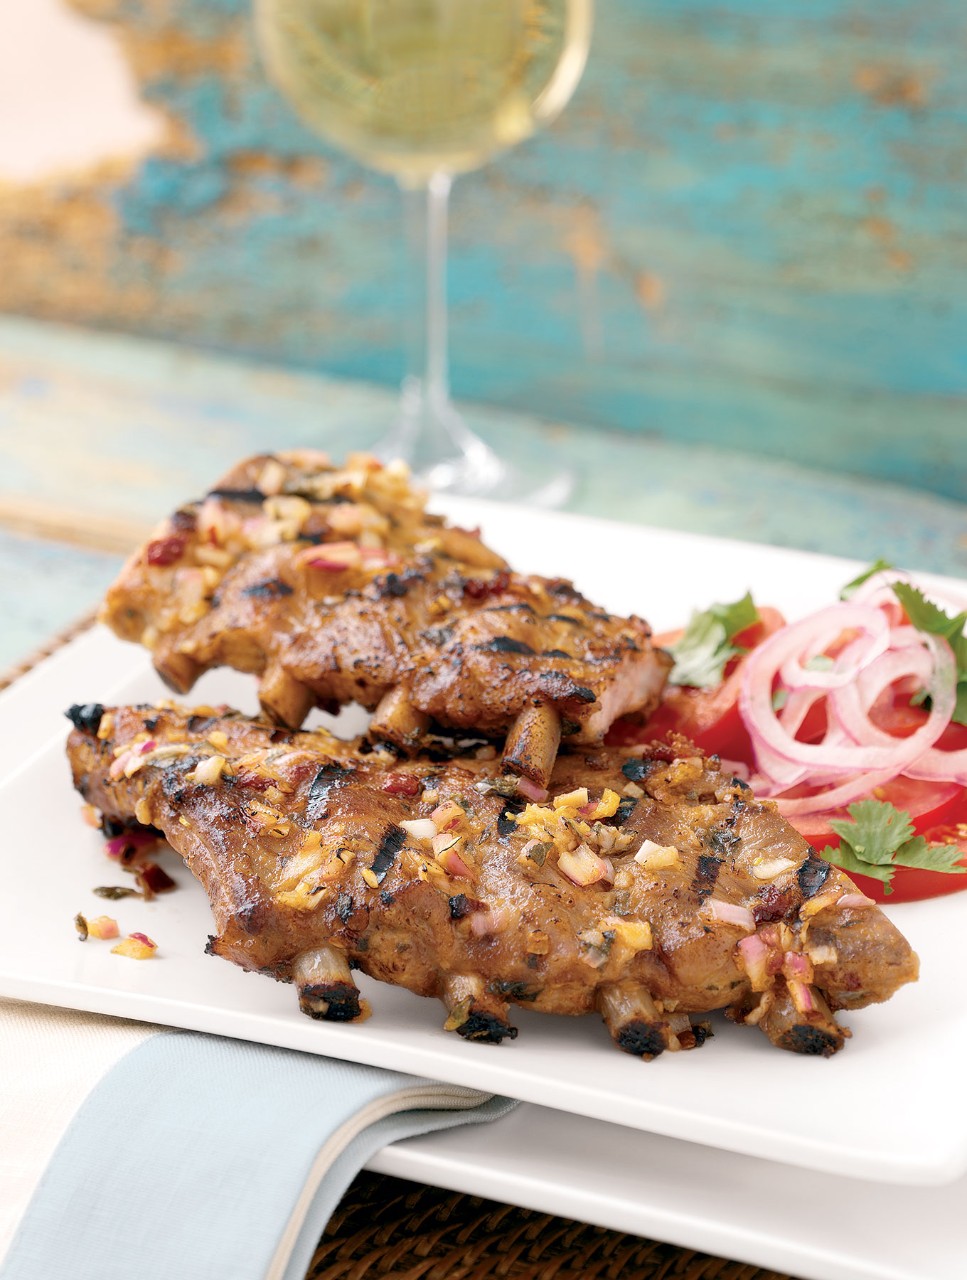 Slow Barbecued Pork Ribs with Chilean Salad